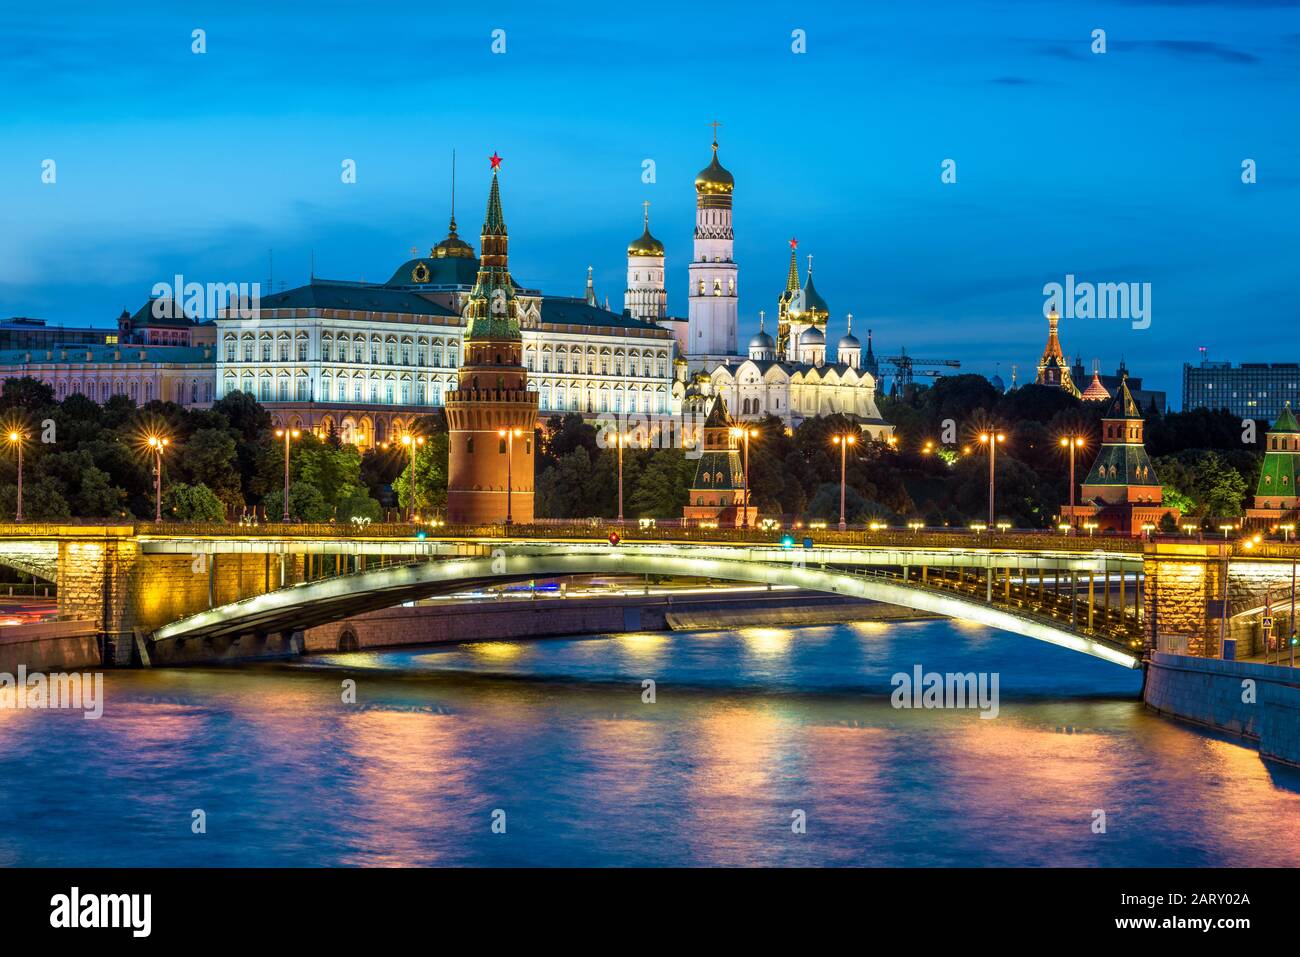 Moscow Kremlin at night, Russia. It is a top tourist attraction of Moscow. Beautiful view of the Moscow Kremlin and old bridge over Moskva River in su Stock Photo